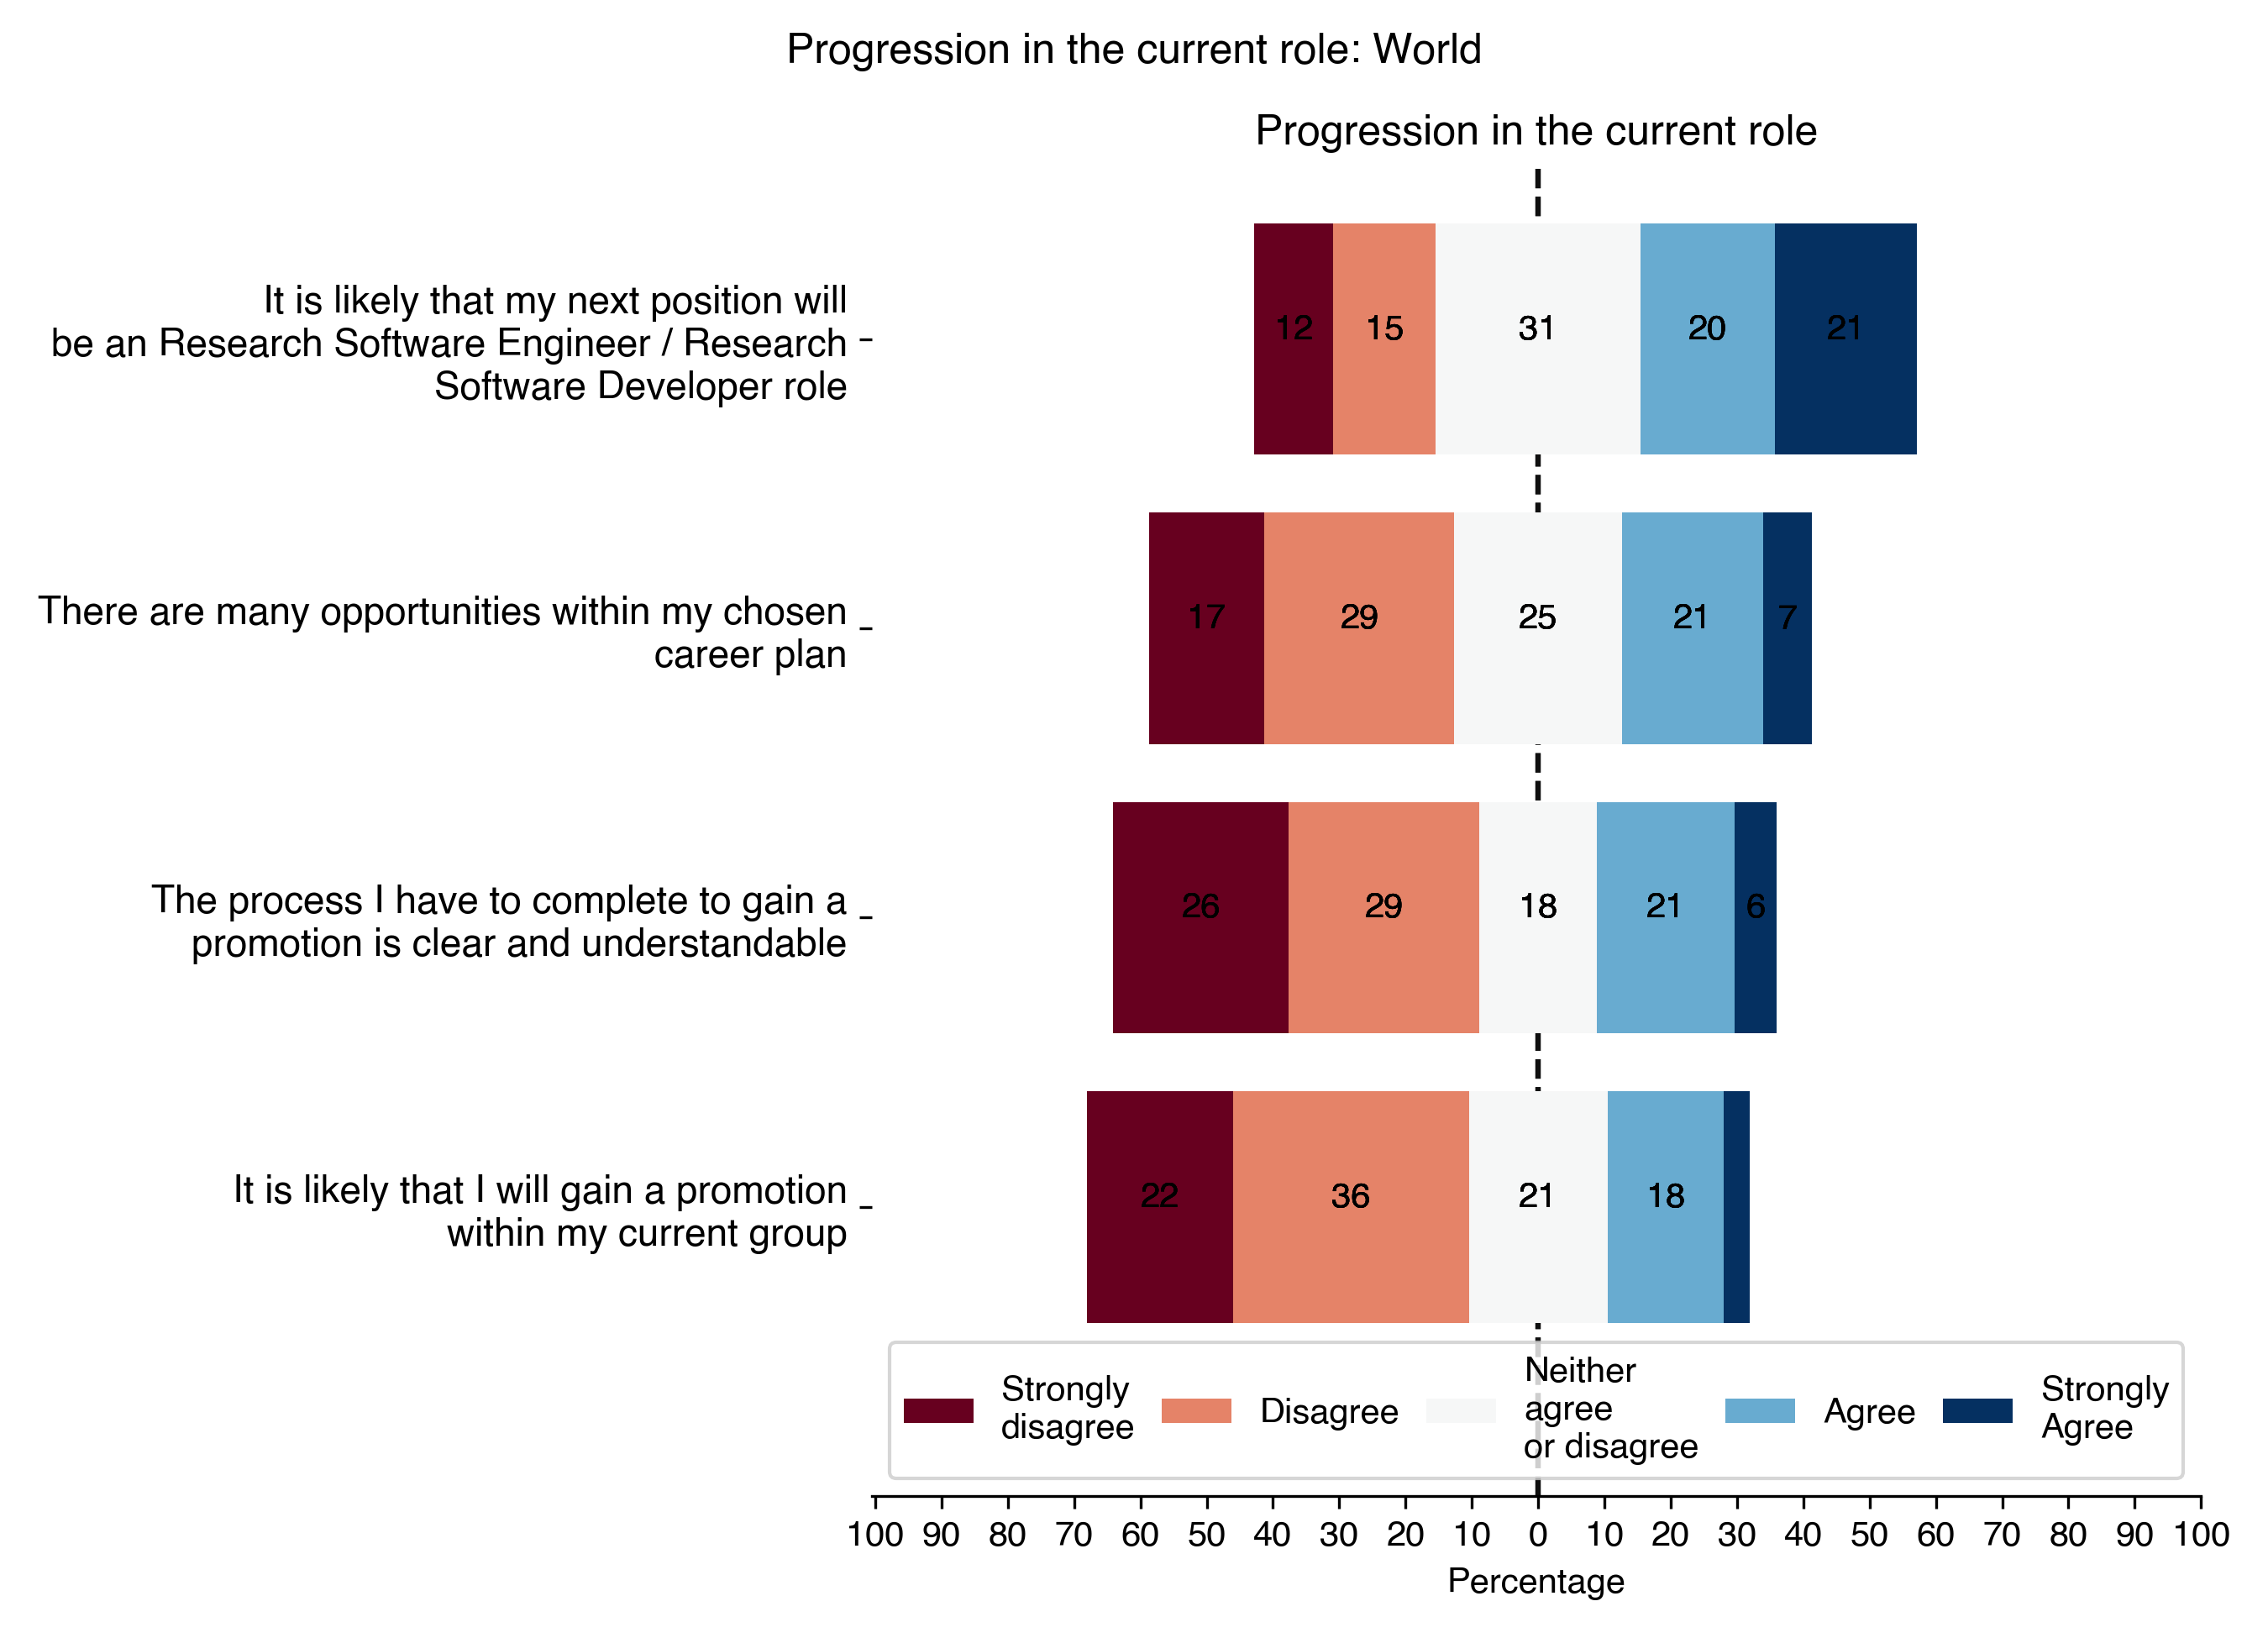 World-wide summary of how people who identify themselves, officially or unofficially, as research software engineers feel about their job progression.   42% vs 27% feel like their next position will be such a role; 28% feel that there are many opportunities for them available; 27% feel that the process to gain a promotion is clear and understandable; and only 20% or so feel that it is likely they will gain a promotion in their current group.